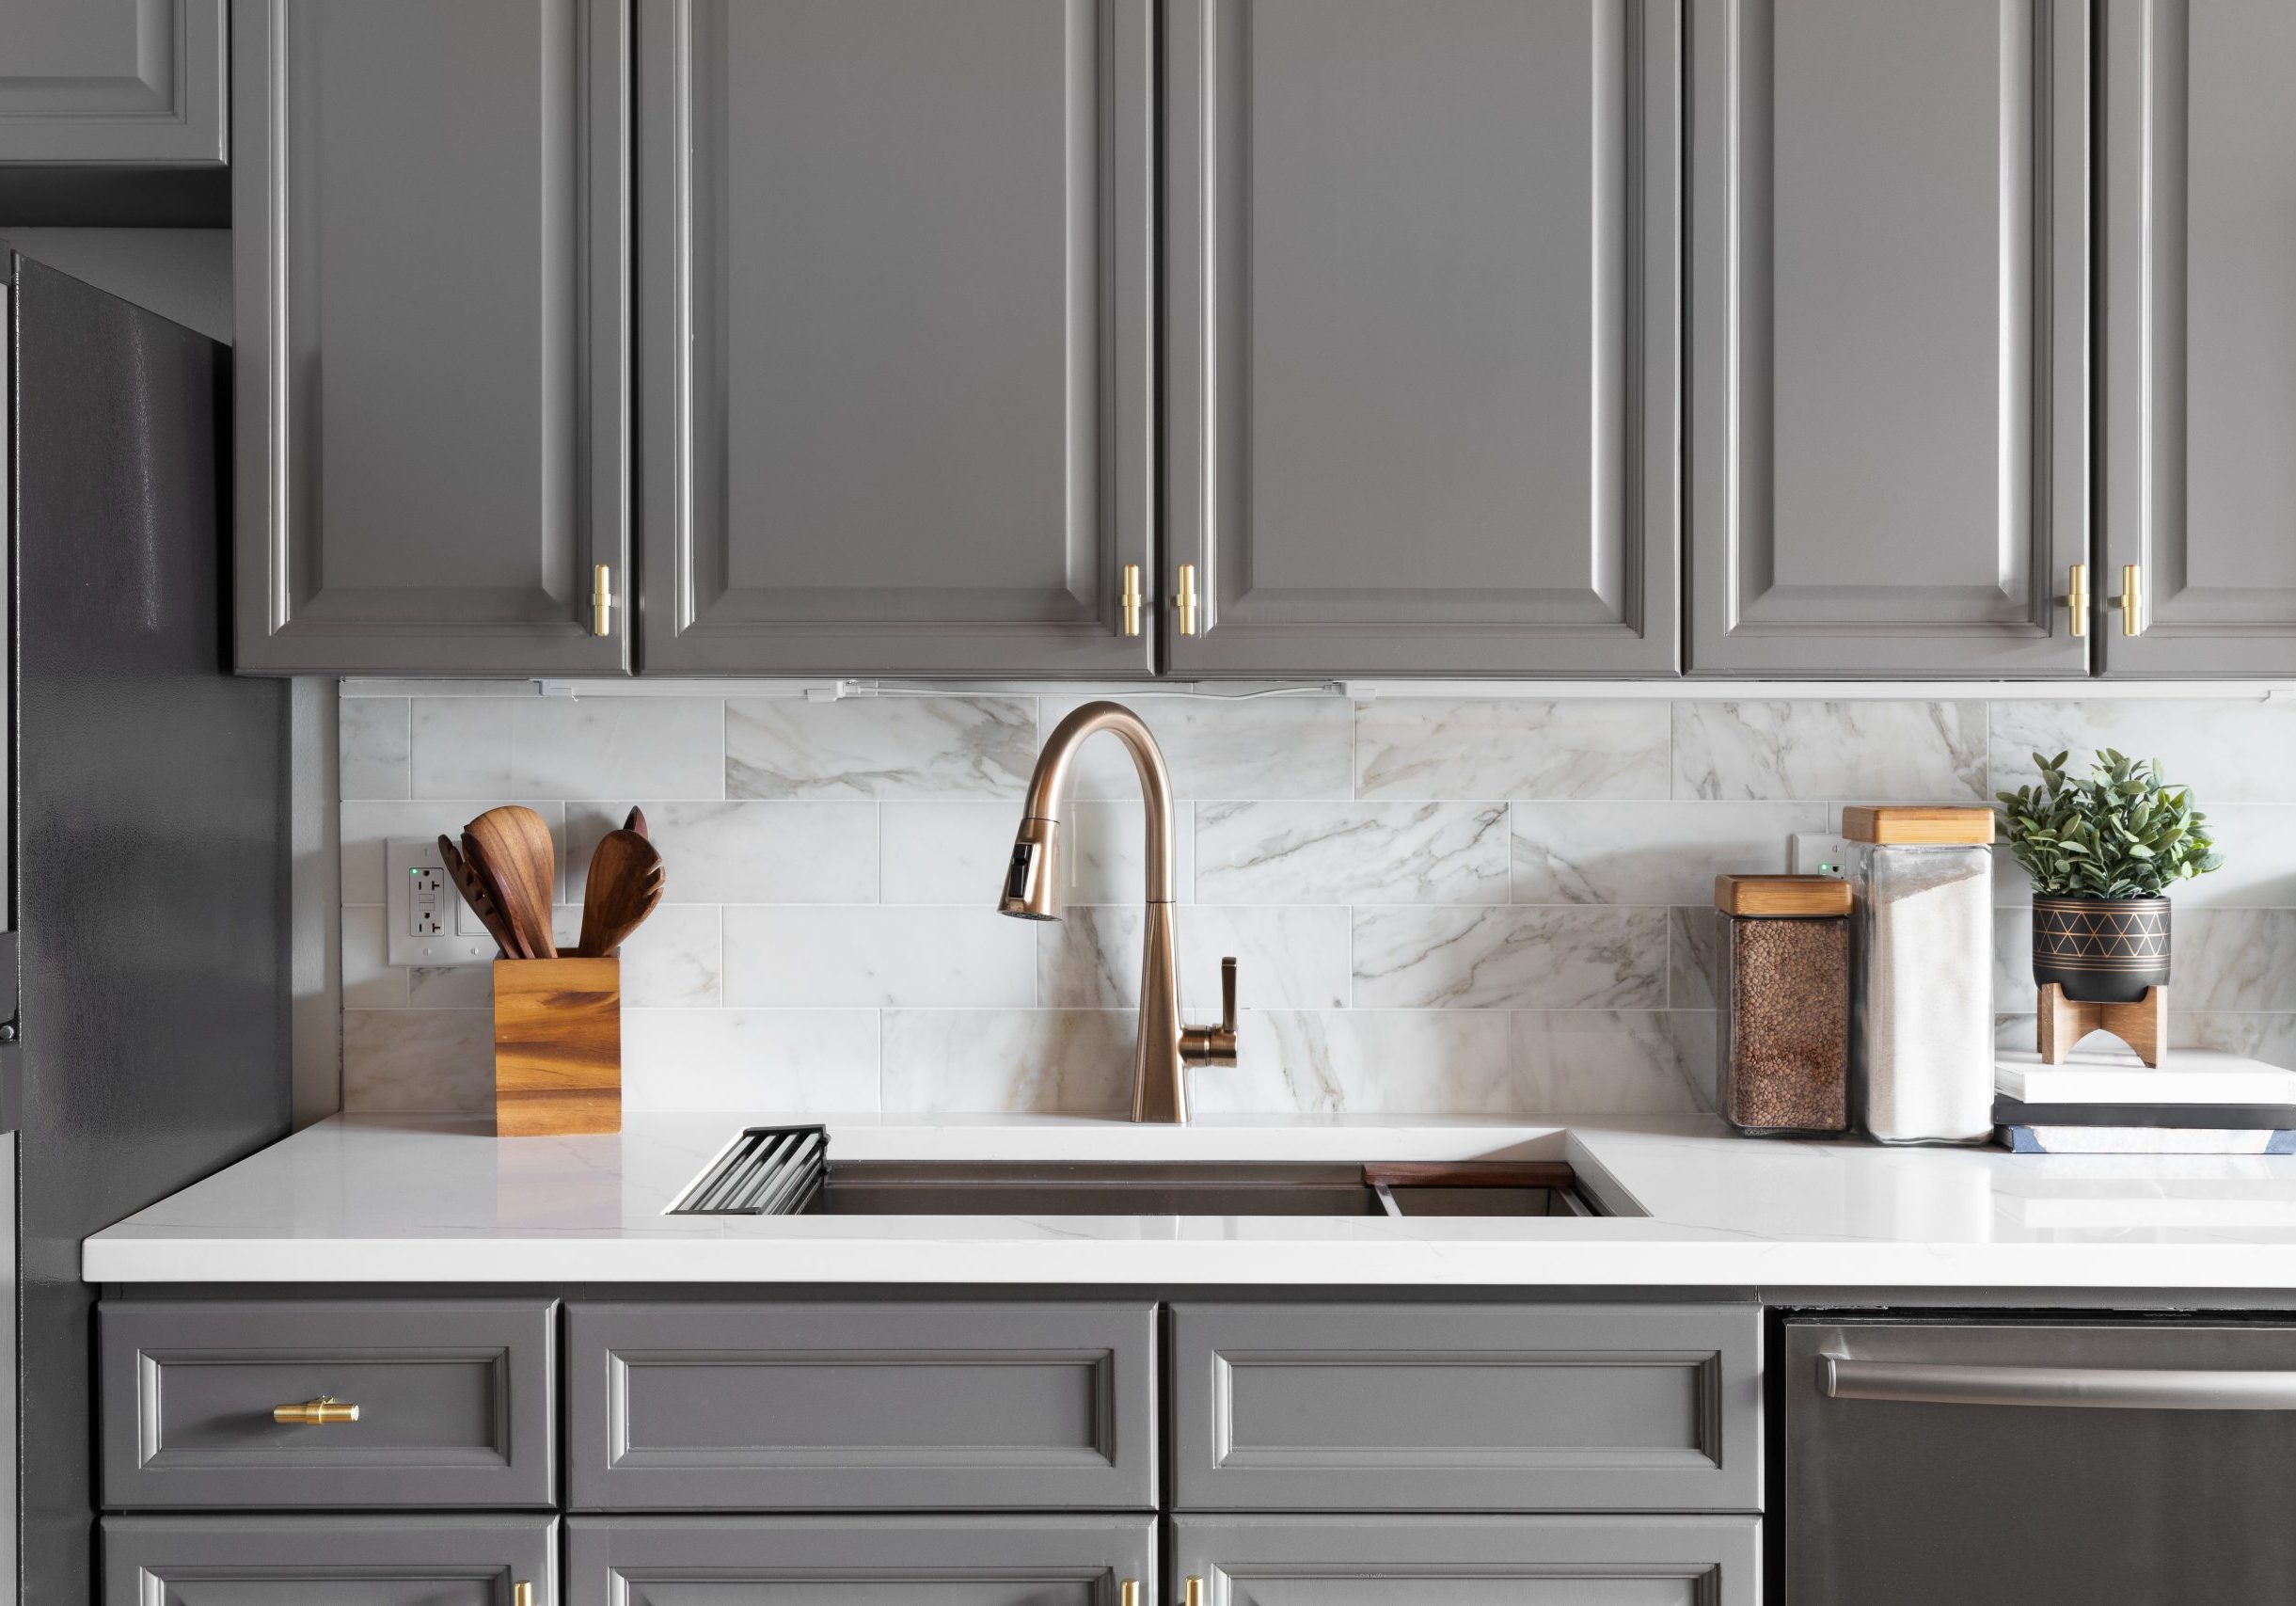 A kitchen sink detail shot with grey cabinets, a white marble co